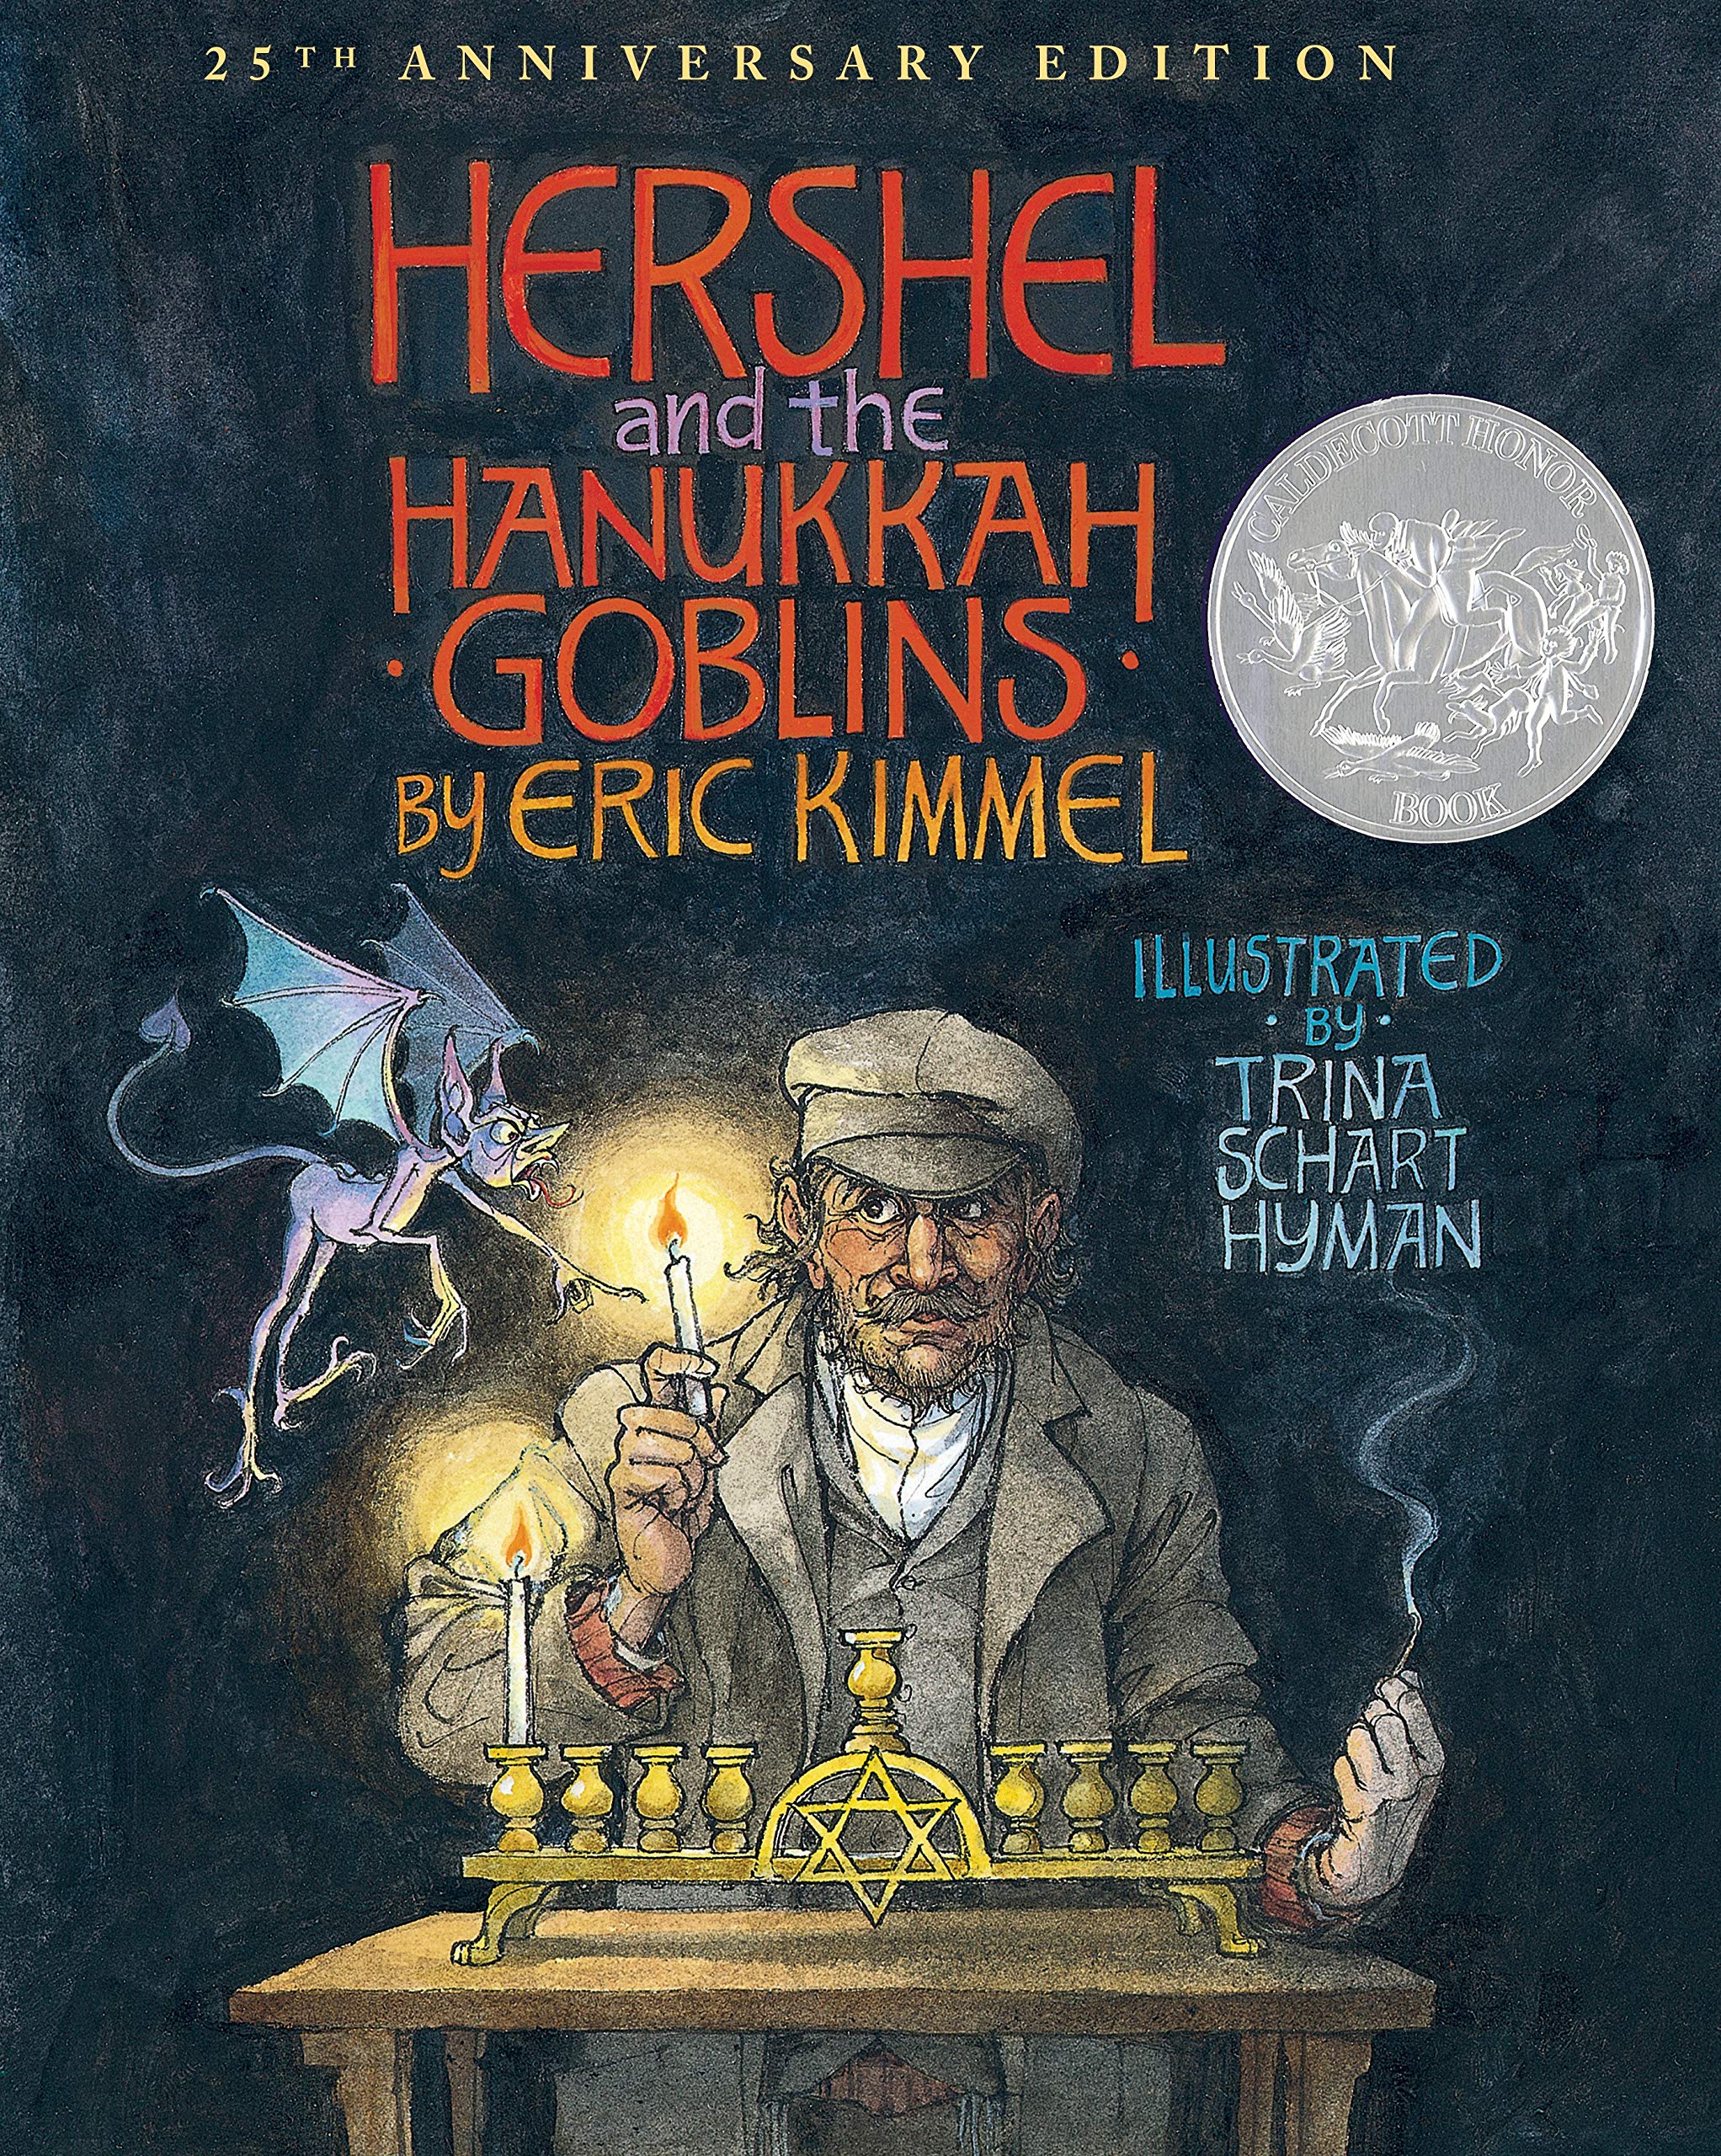 Hershel and the Hanukkah Goblins: Gift Edition